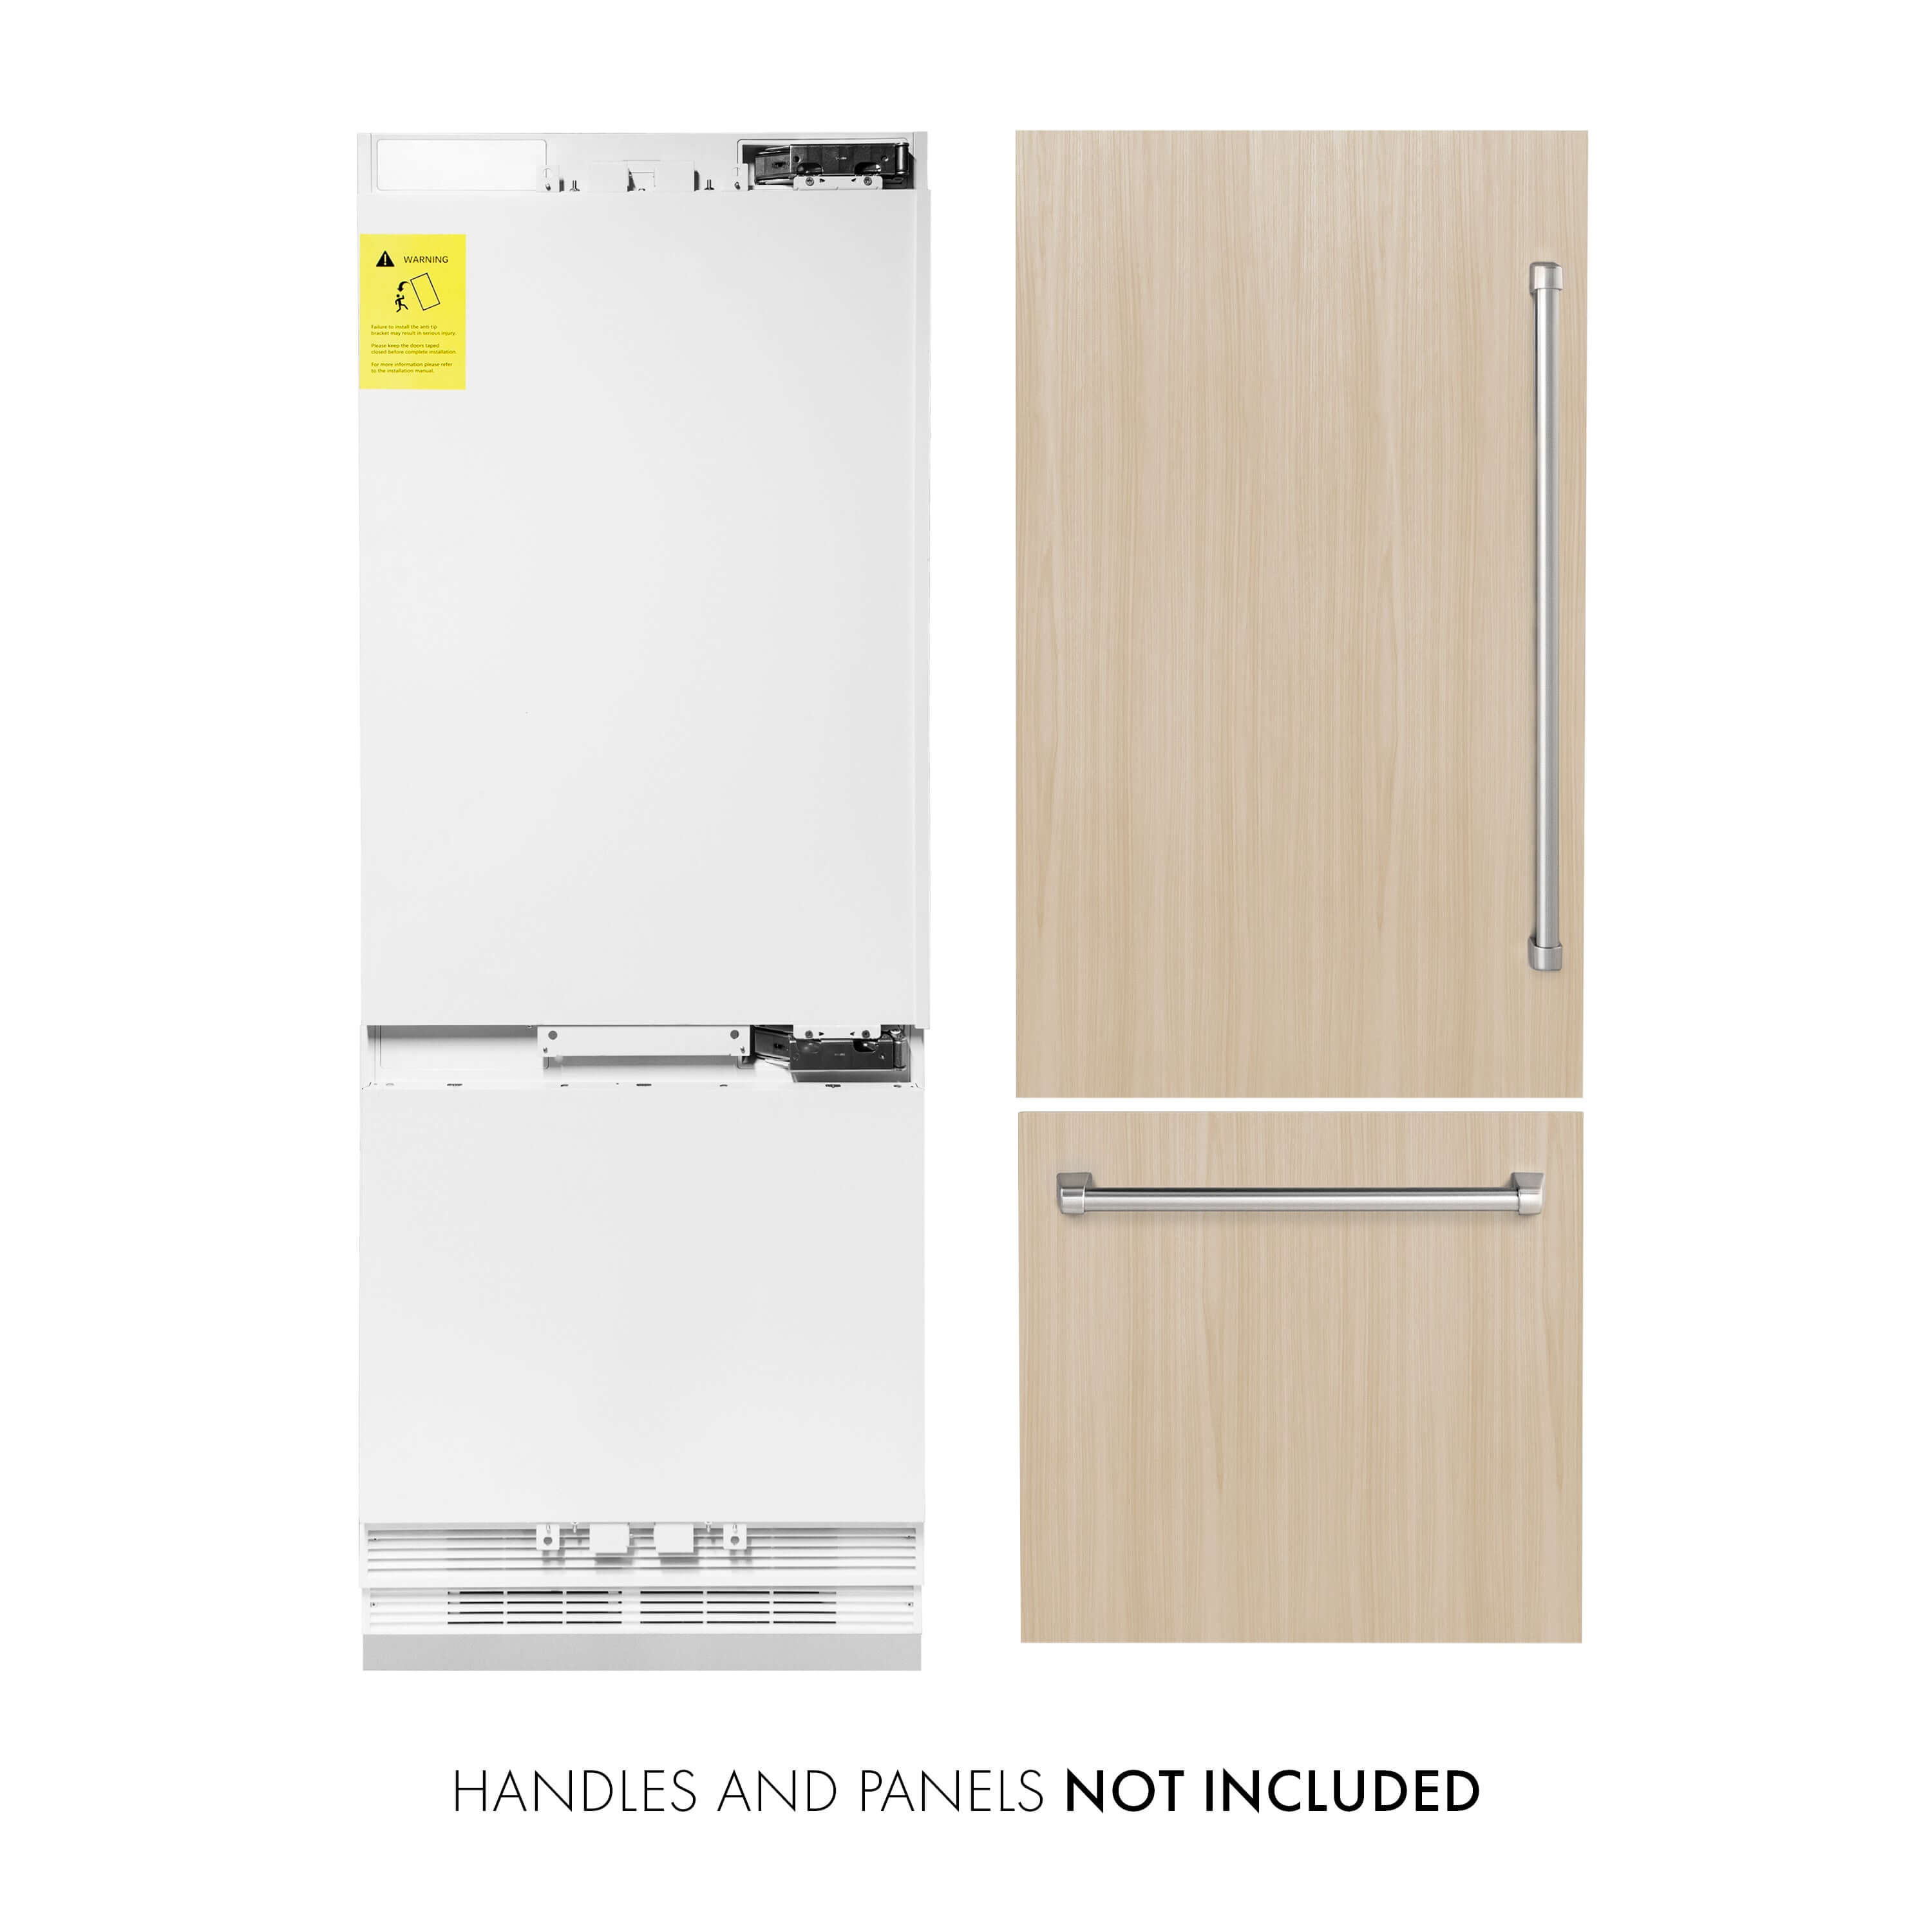 This ZLINE refrigerator is panel-ready. Handles and panels are NOT included.